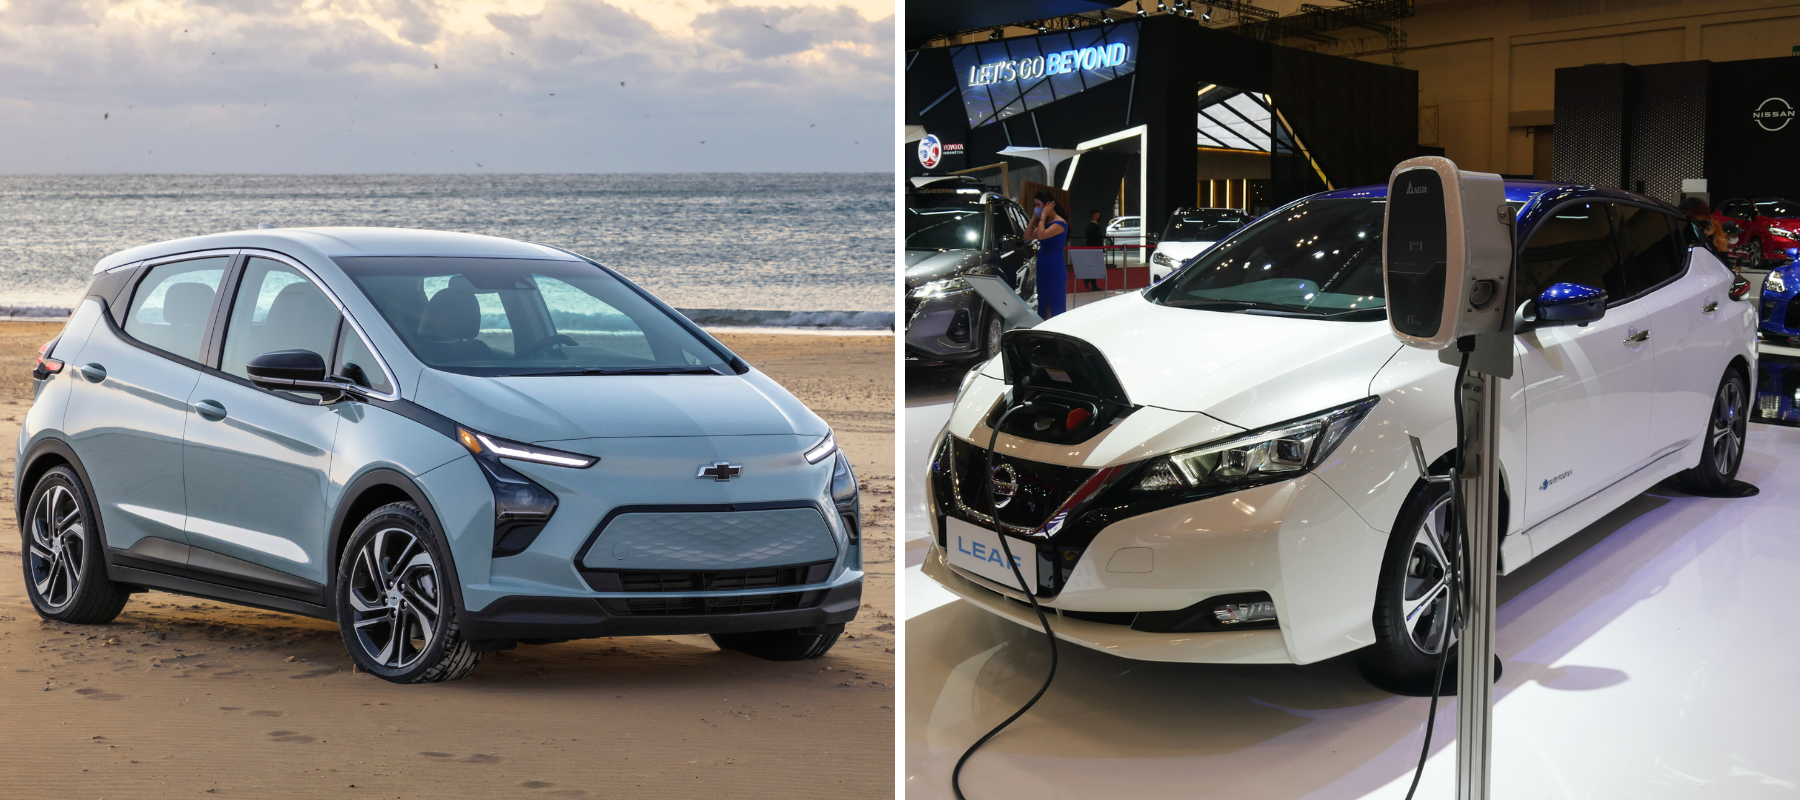 The 2022 Chevy Bolt EV and the 2022 Nissan Leaf electric vehicle models